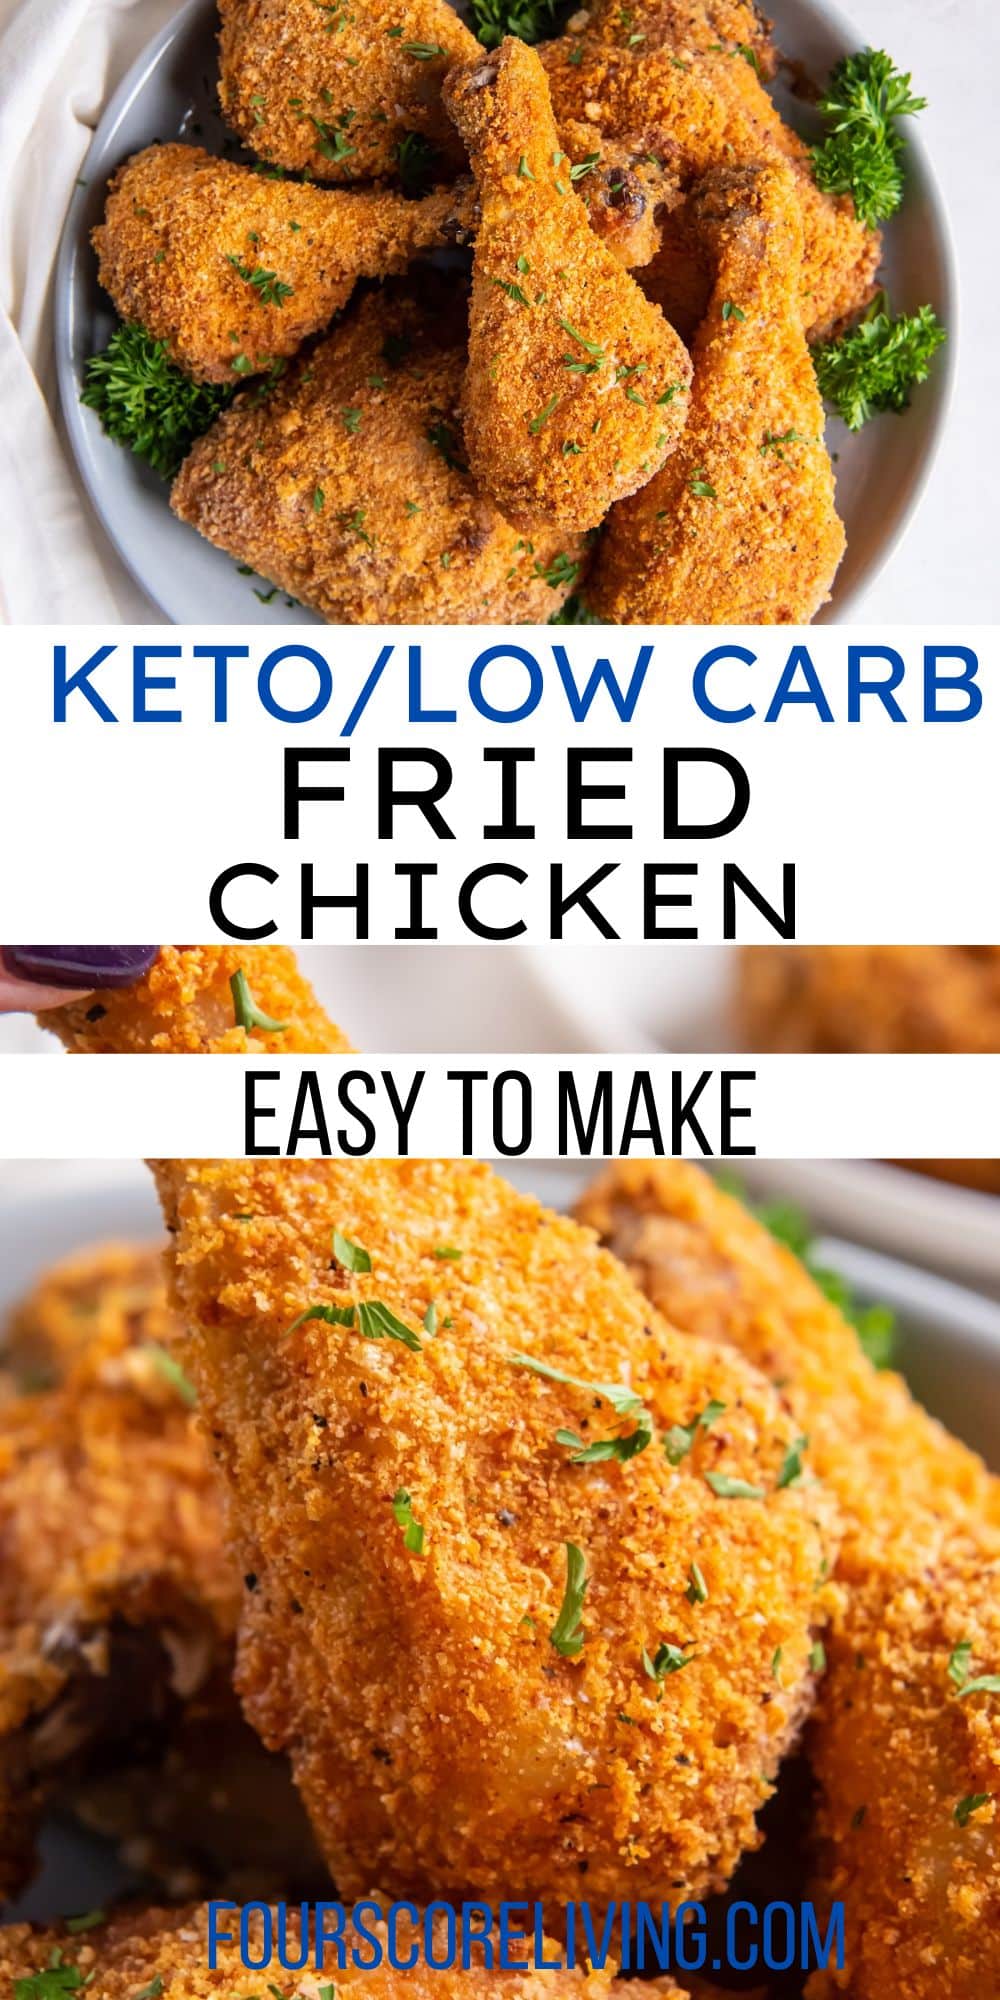 two images of breaded keto fried chicken with text title overlay